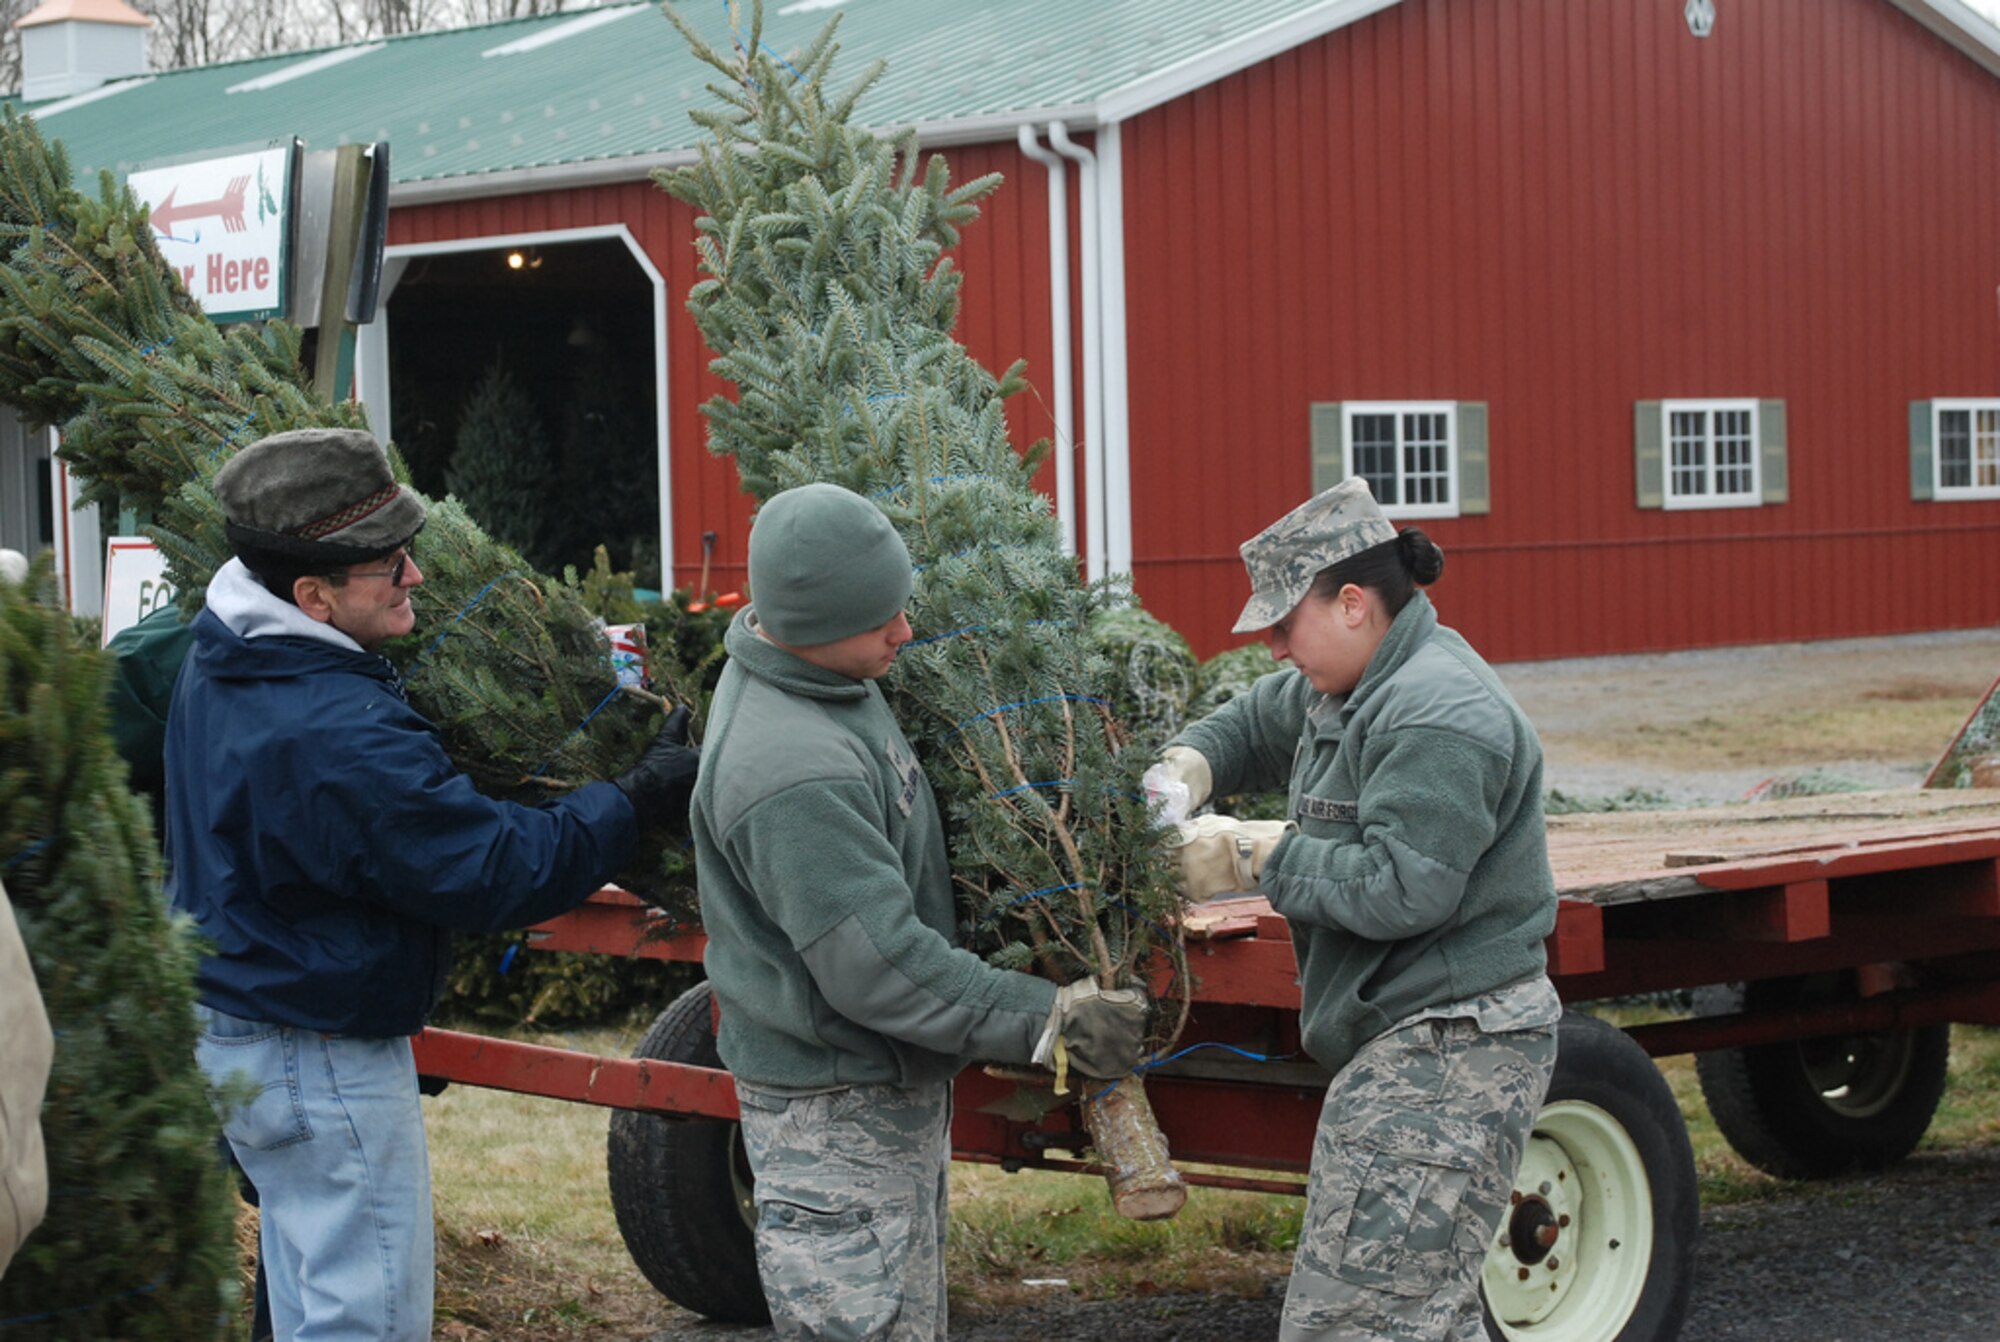 BALLSTON SPA, N.Y. -- New York Air National Guard members of the 109th Airlift Wing from Scotia, N.Y. volunteer their time to assist FedEx driver Don Pelletier load Christmas Trees here at Ellms Christmas Tree Farm Dec. 7. Nearly 20 Airmen volunteered to assist in the annual "Trees for Troops" loading of about 150 donated trees bound for military installations and families around the country and the globe. U.S. Army photo by Col. Richard Goldenberg, New York Army National Guard. (RELEASED)